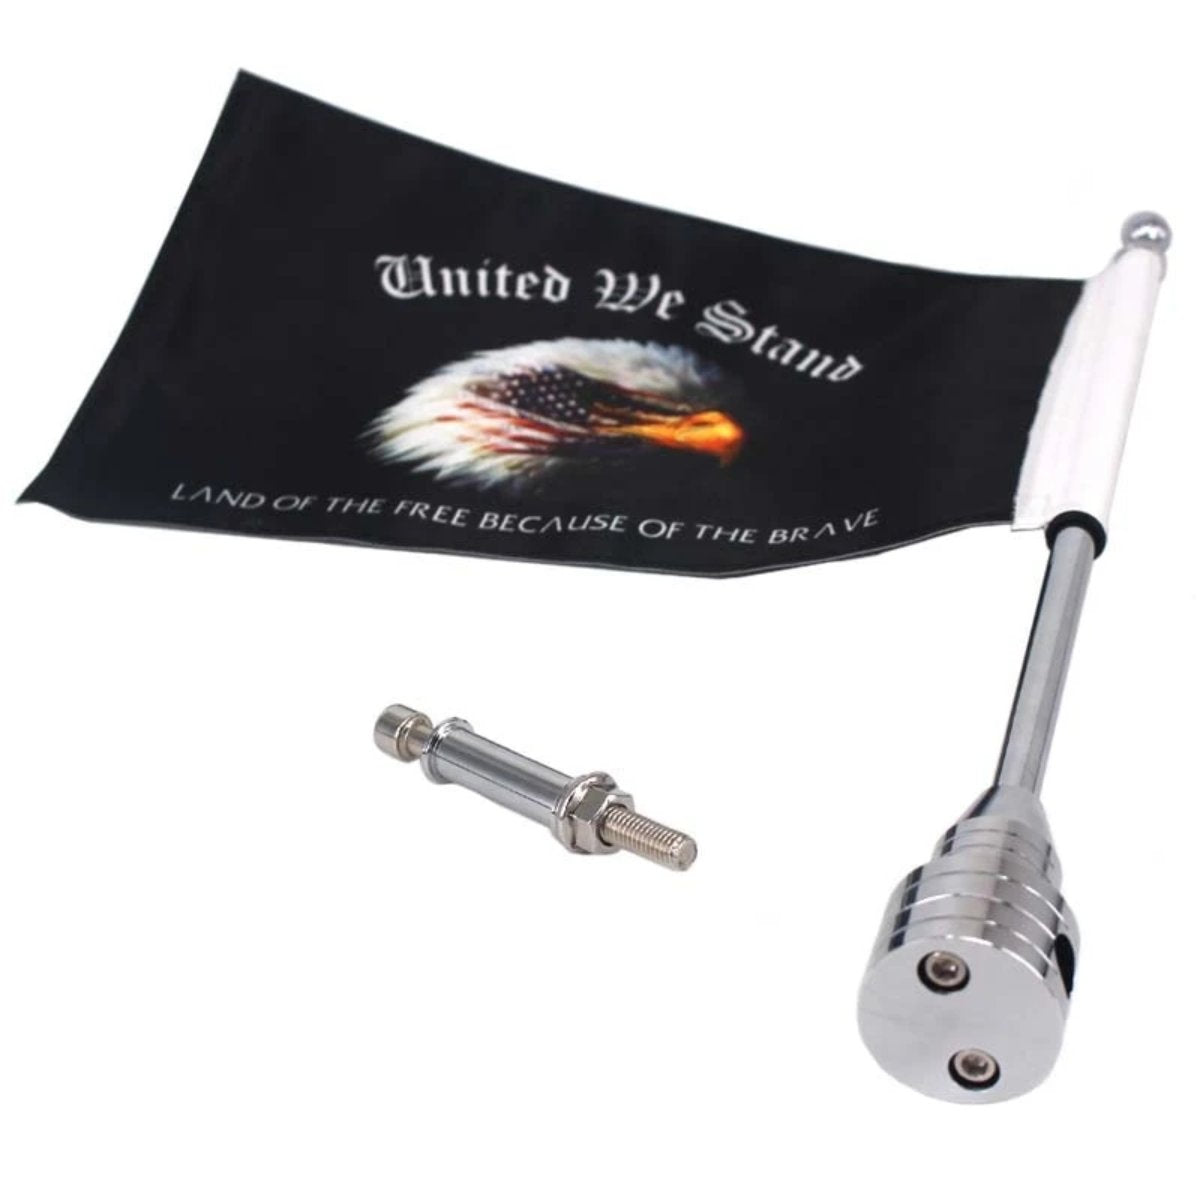 United We Stand Motorcycle Flag Pole Mount